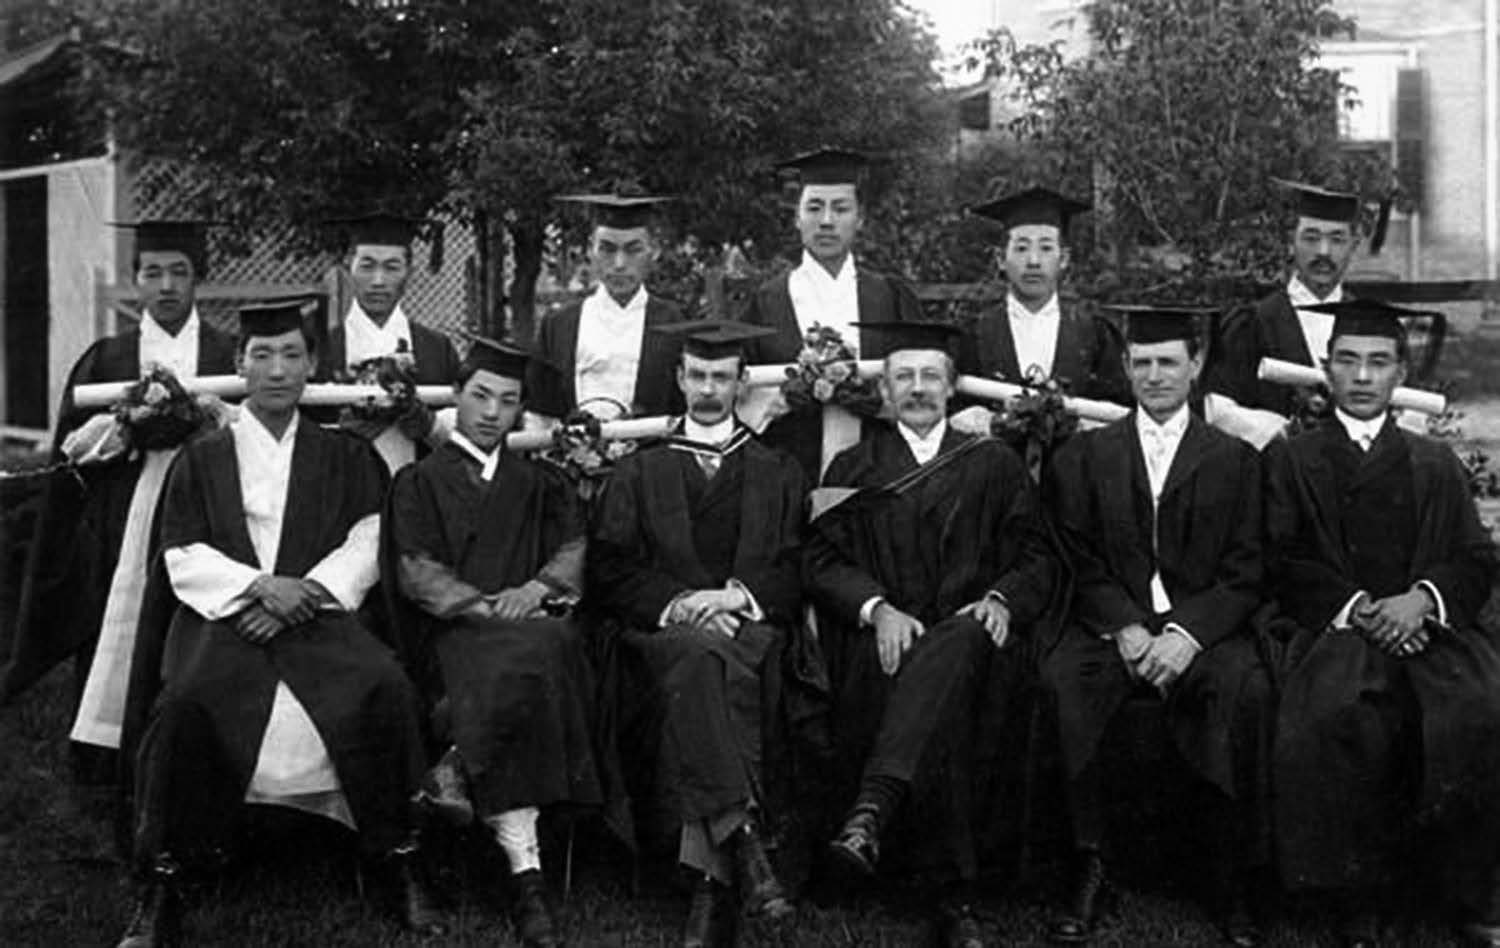 1911 Severance Union Medical College graduates (six graduates in total) are shown with members of the faculty: Dr. Kim, Dr. Hirst, Dr. Avison, Dr. Weir, Dr. Pak, Dr. Hong. The students and faculty are all wearing graduation robes. 